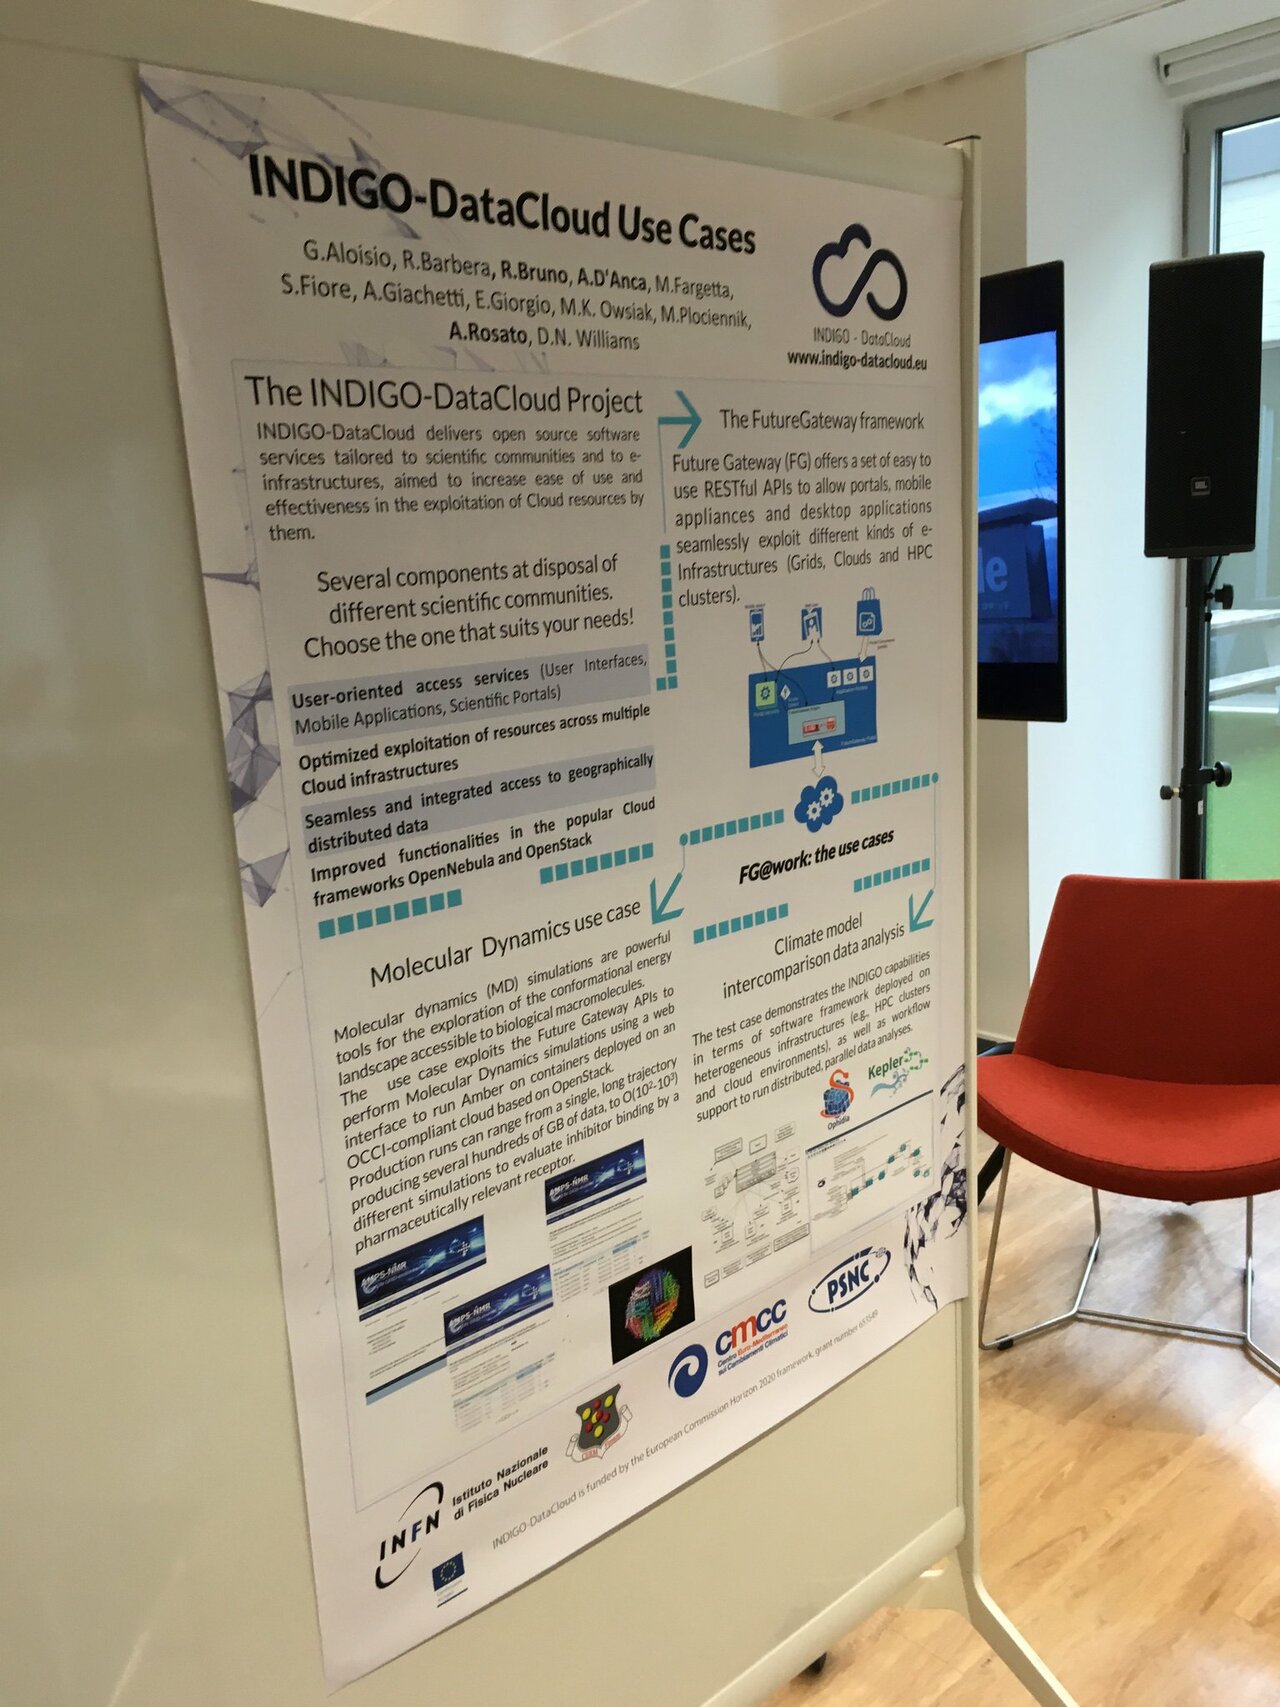 RT @GridCatania: #Cloudscape2016 just started and @indigodatacloud is there. Here's the poster with the use cases to be demonstrated https://t.co/VvKOY1l66m